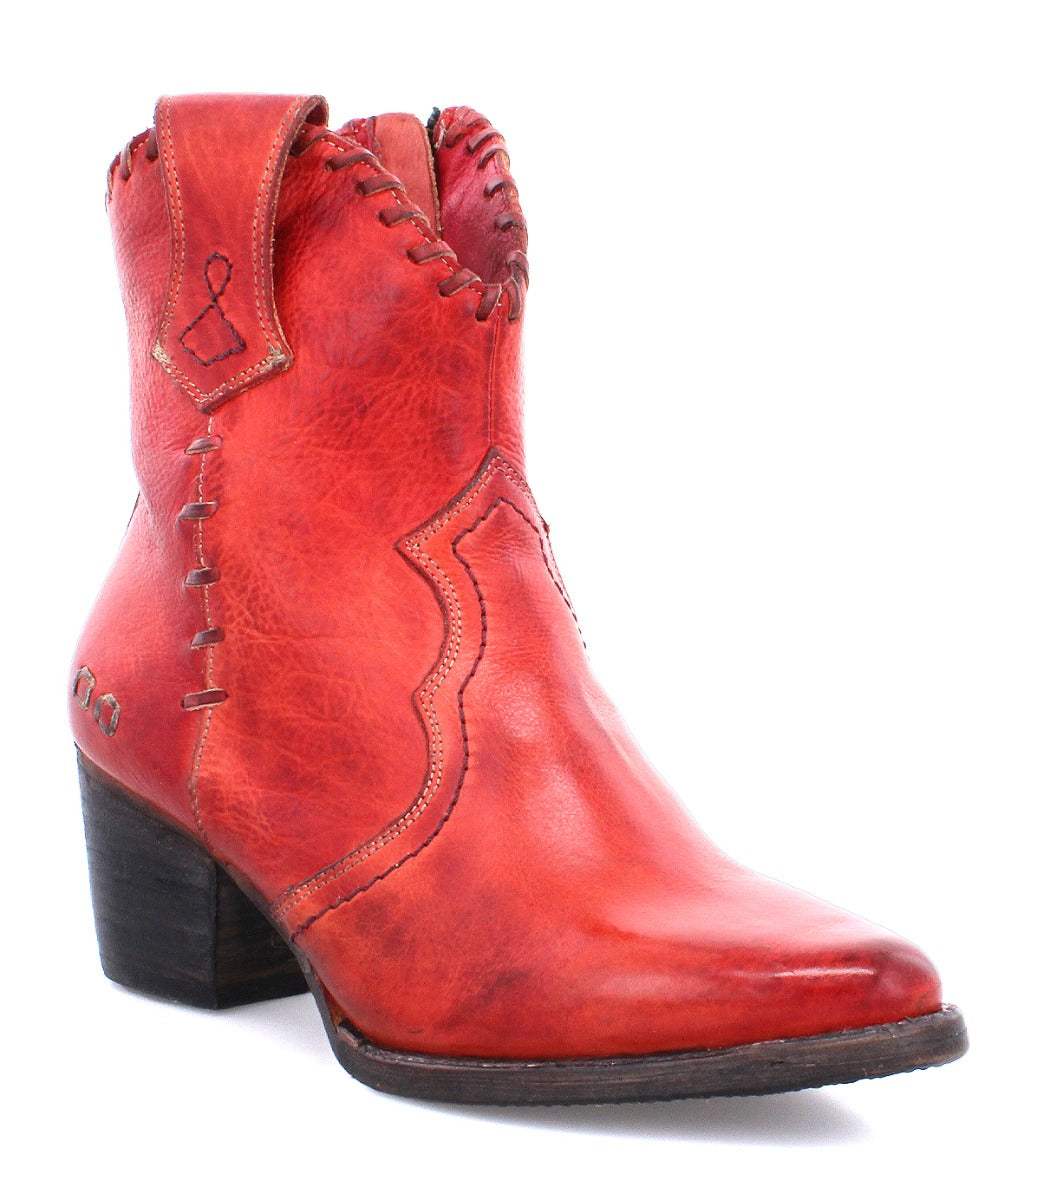 A women's Baila II cowboy boot with a wooden heel from the brand Bed Stu.